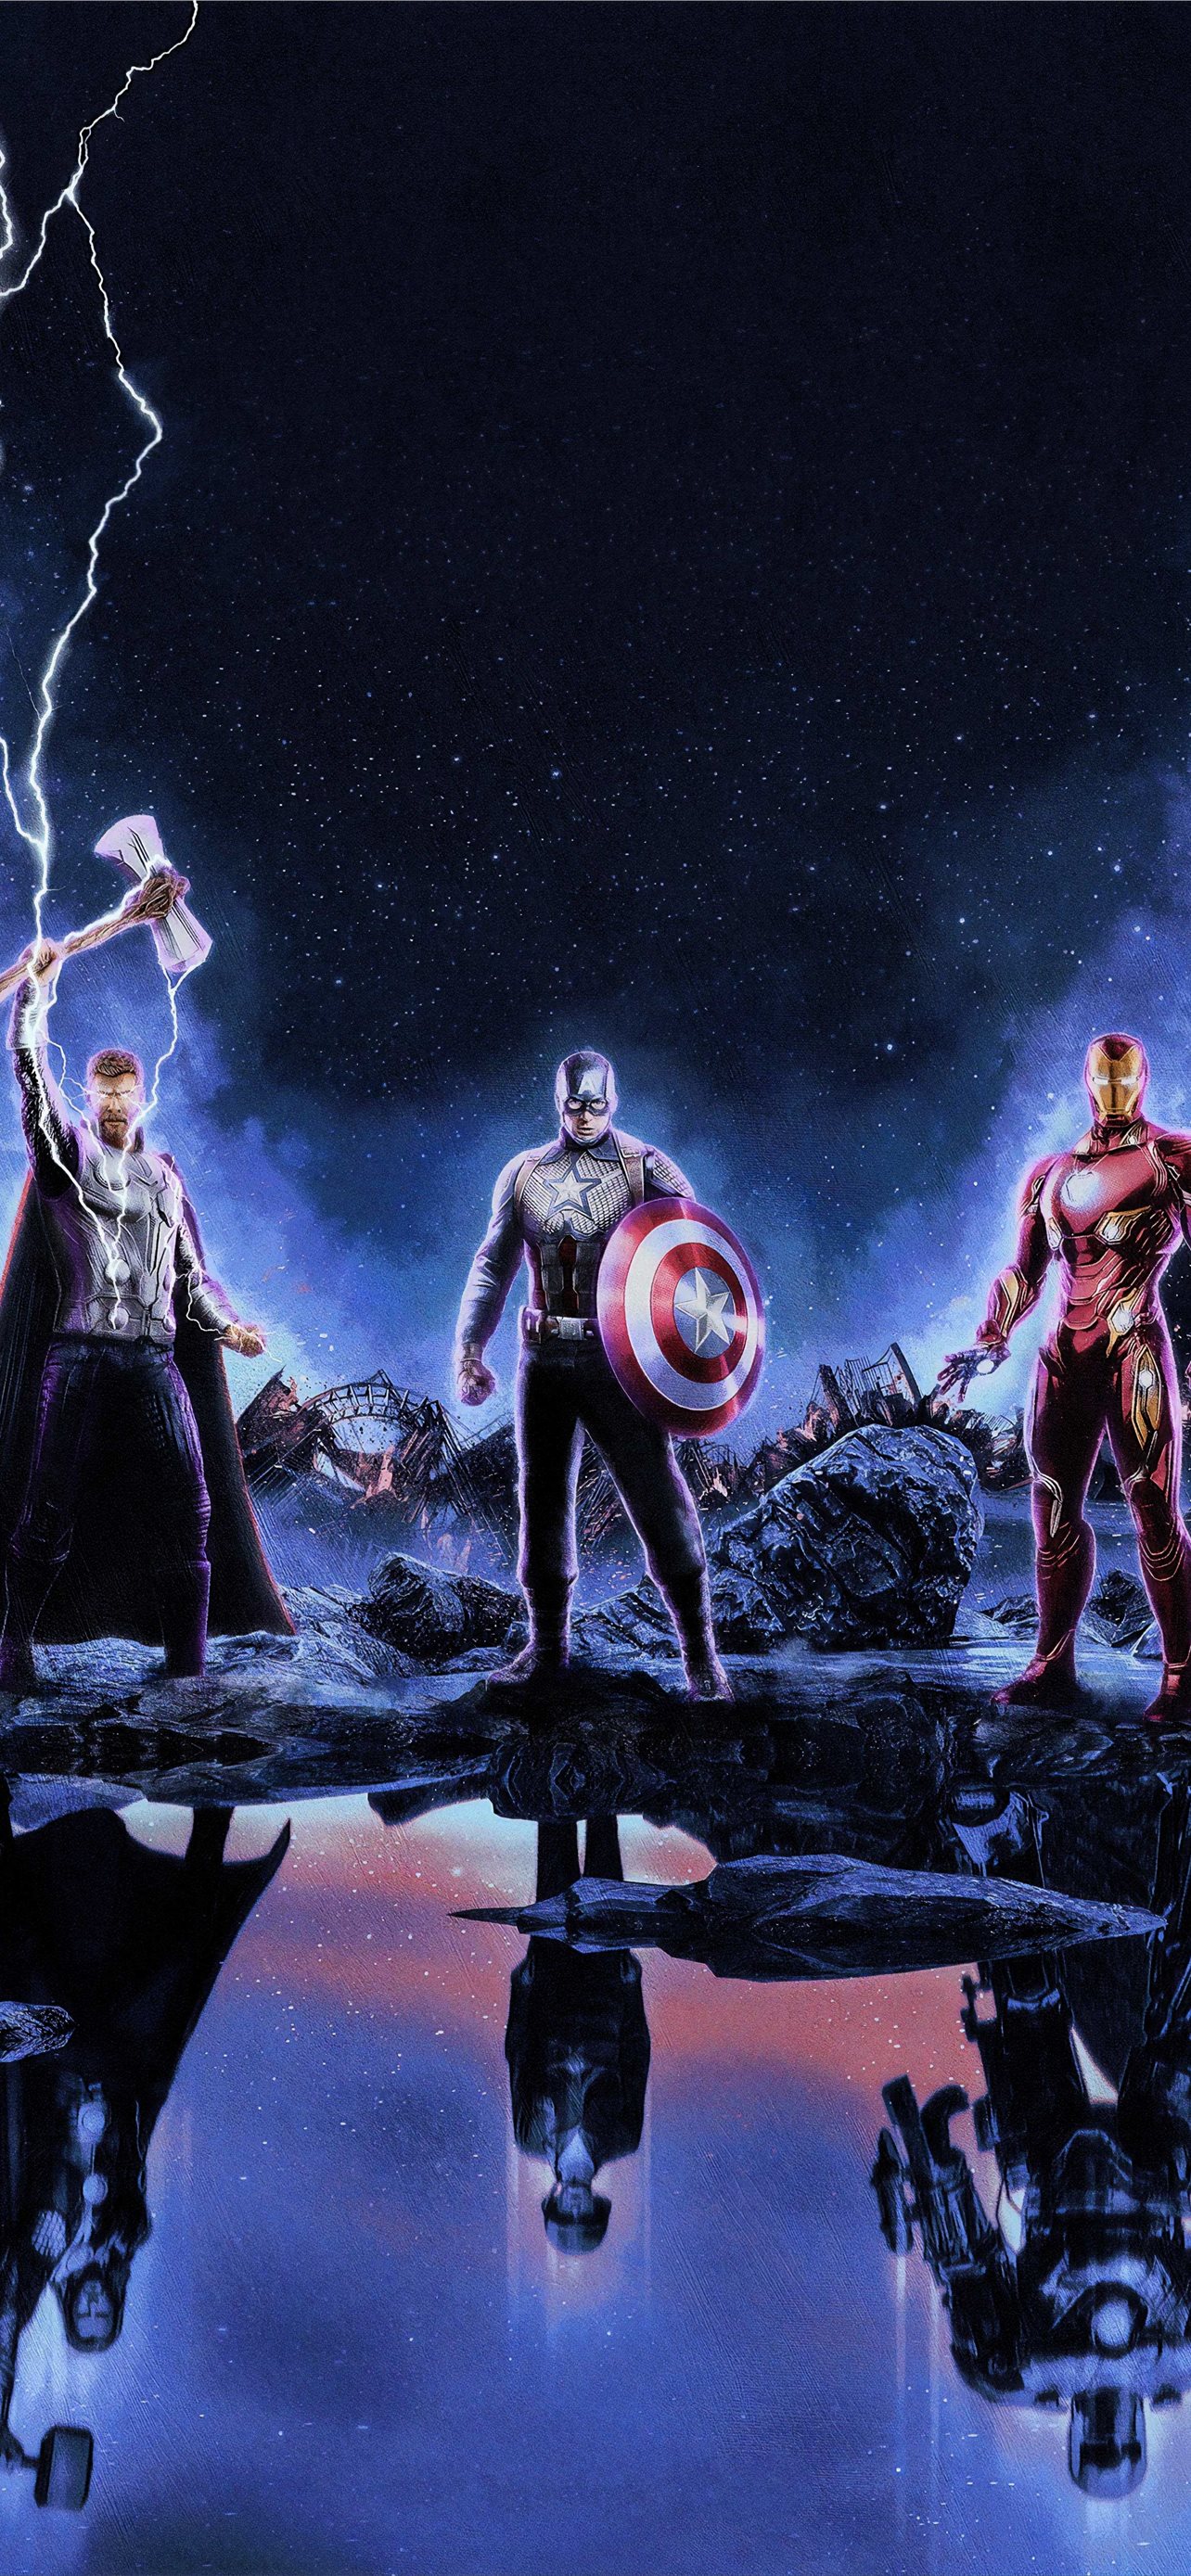 The Trinity Avengers Endgame HD Movies 4K Image P. iPhone Wallpaper Free Download